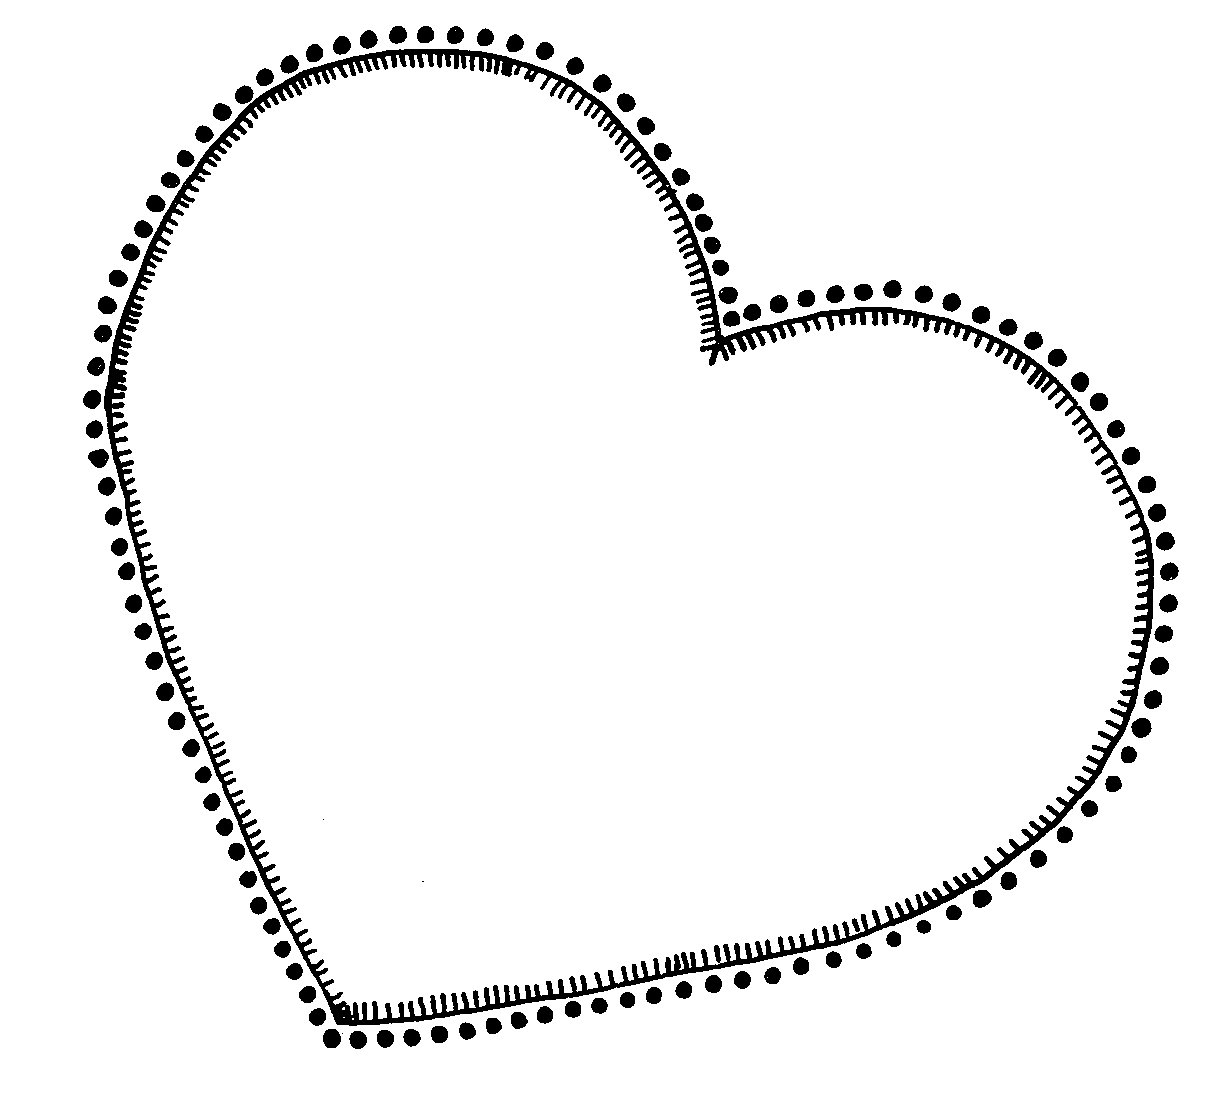 Heart outline clipart black and white free